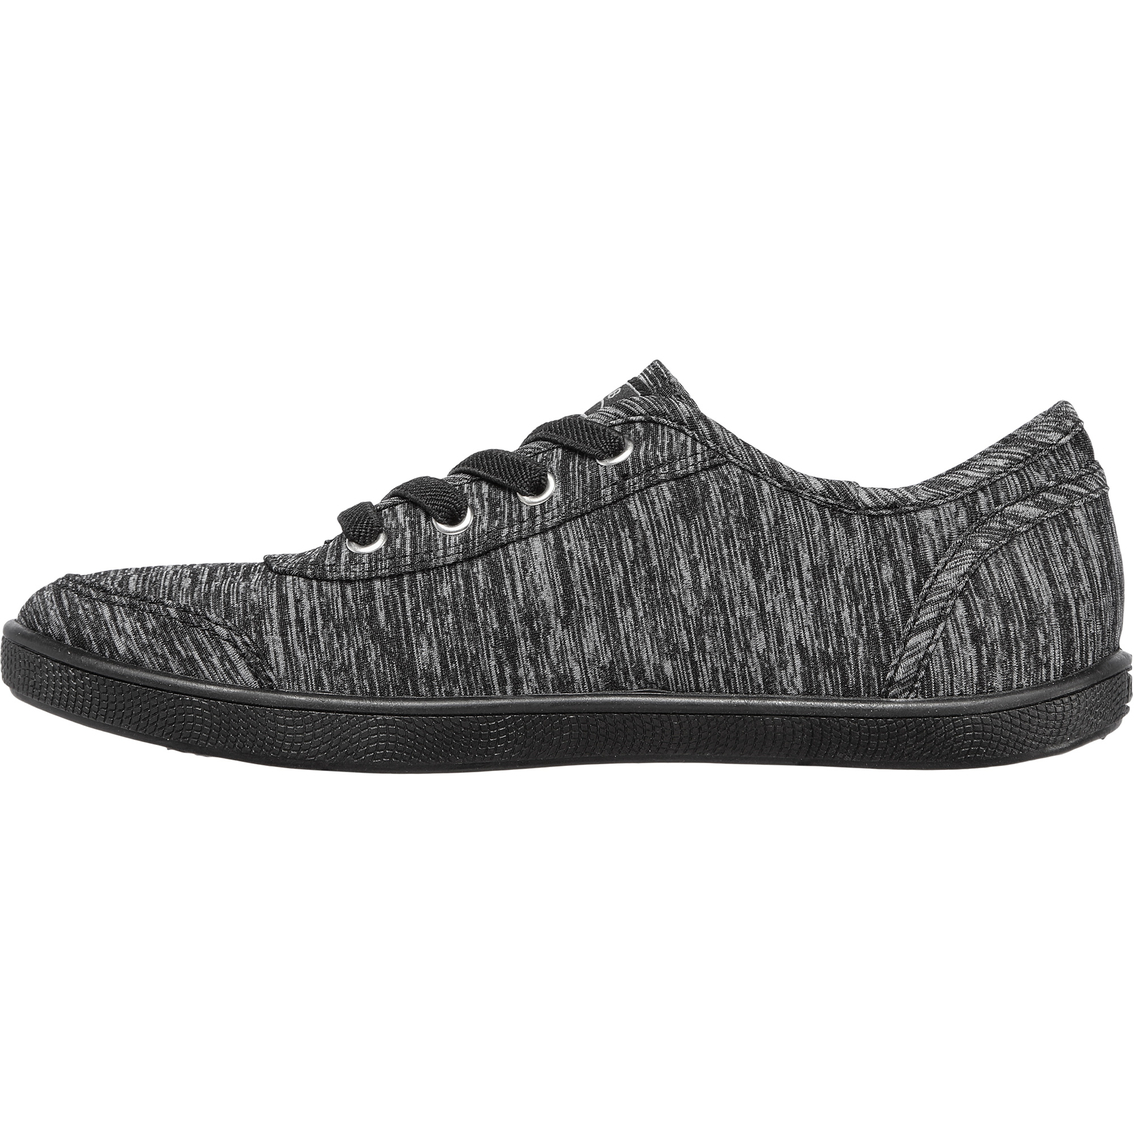 BOBS from Skechers Women's BOBS B Cute Fresh Times Shoes - Image 3 of 5